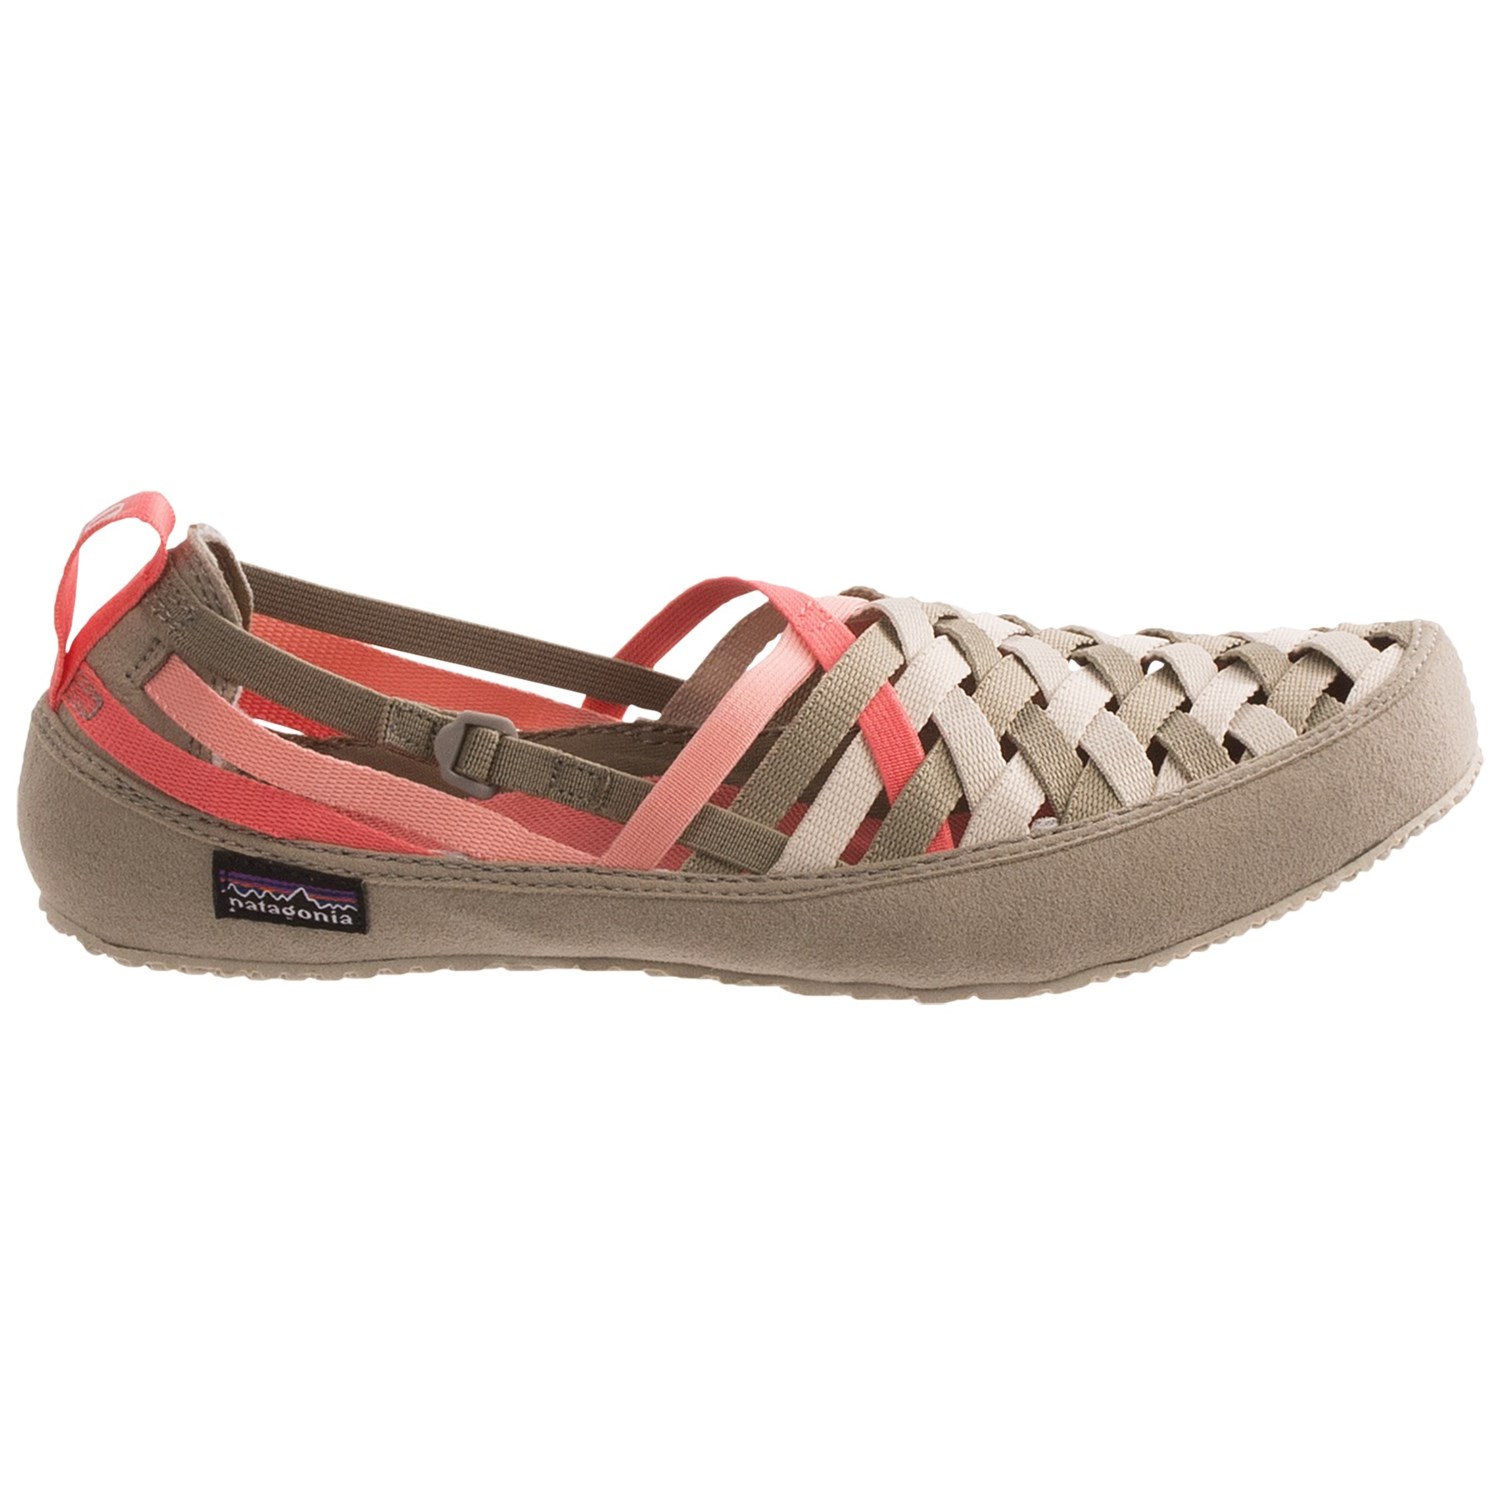 Patagonia Advocate Lattice Shoes (For Women) 7791X